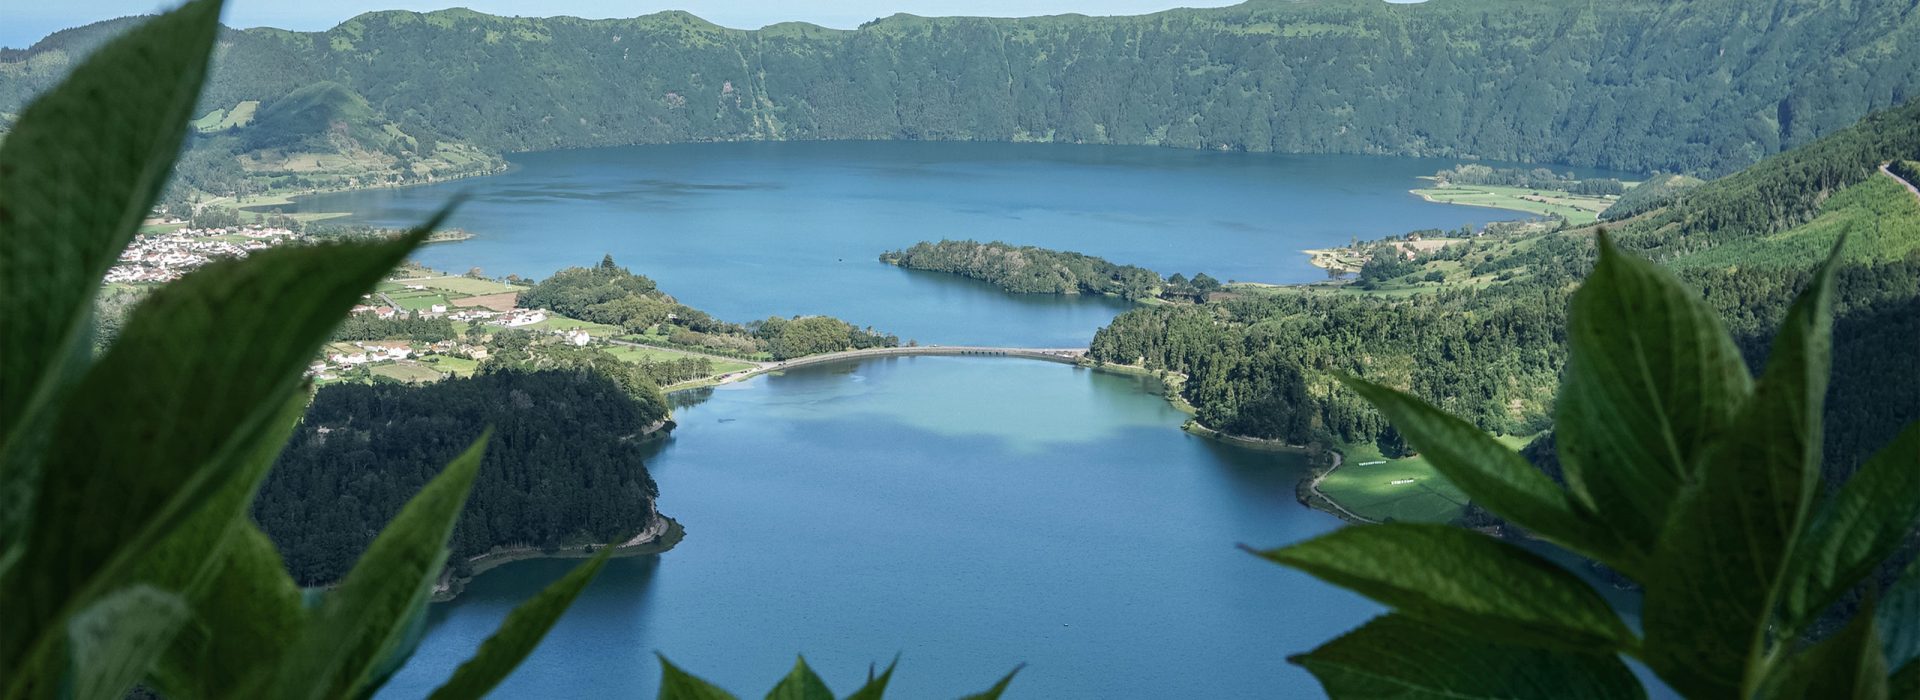 Incredibly green scenery, vibrant blue and green volcanic crater lakes